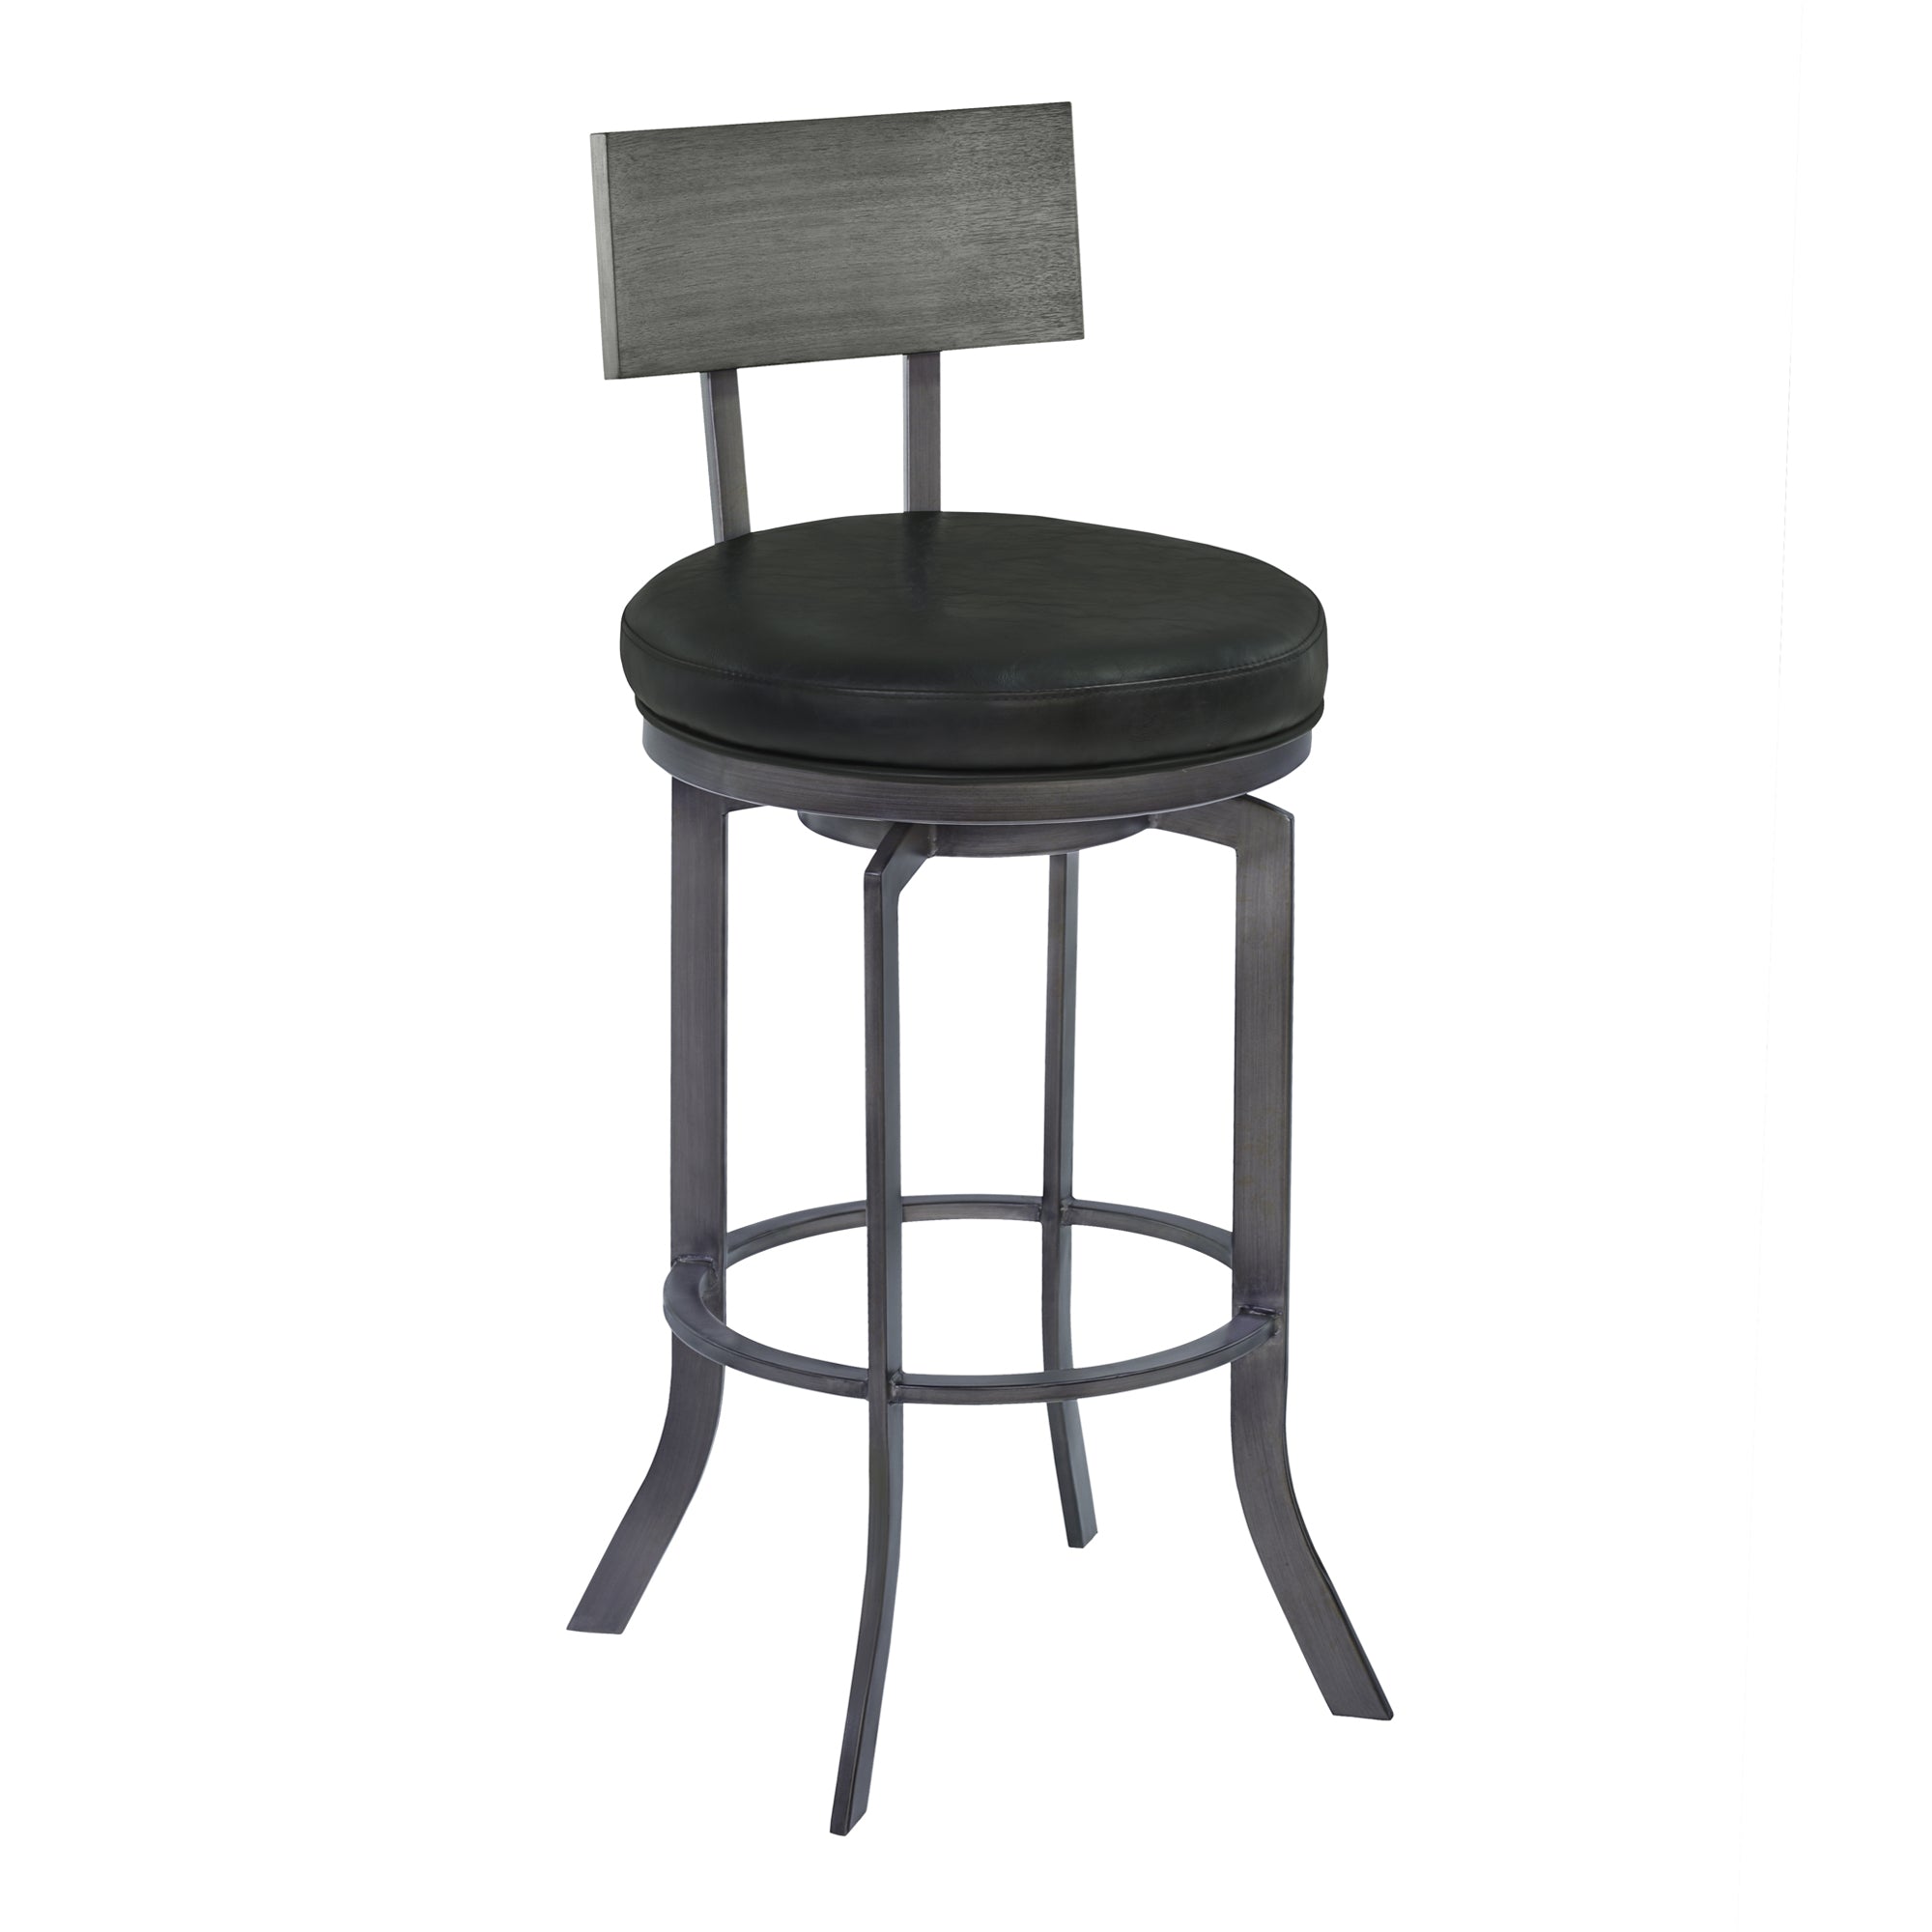 Armen Living Lcojbavbgr30 Ojai 30" Bar Height Metal Swivel Barstool In Vintage Black Faux Leather With Mineral Finish And Gray Walnut Wood Back